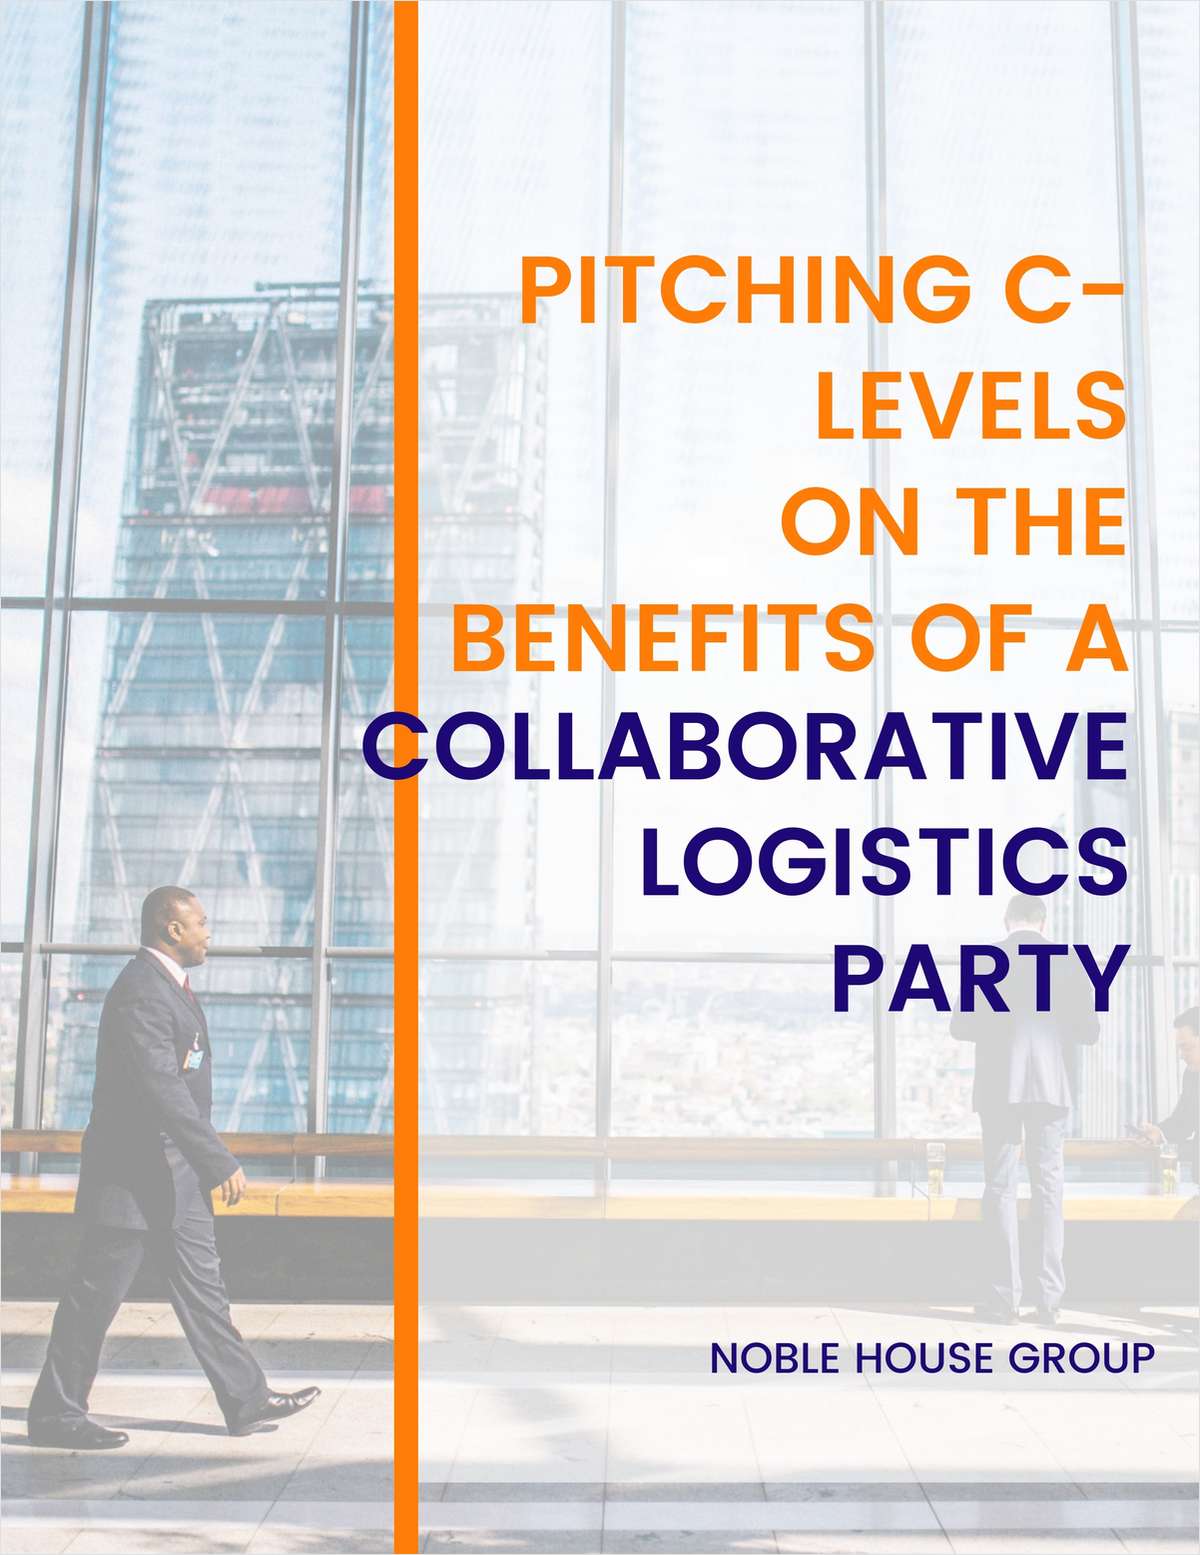 Pitching C-levels on the Benefits of a Collaborative Logistics Party